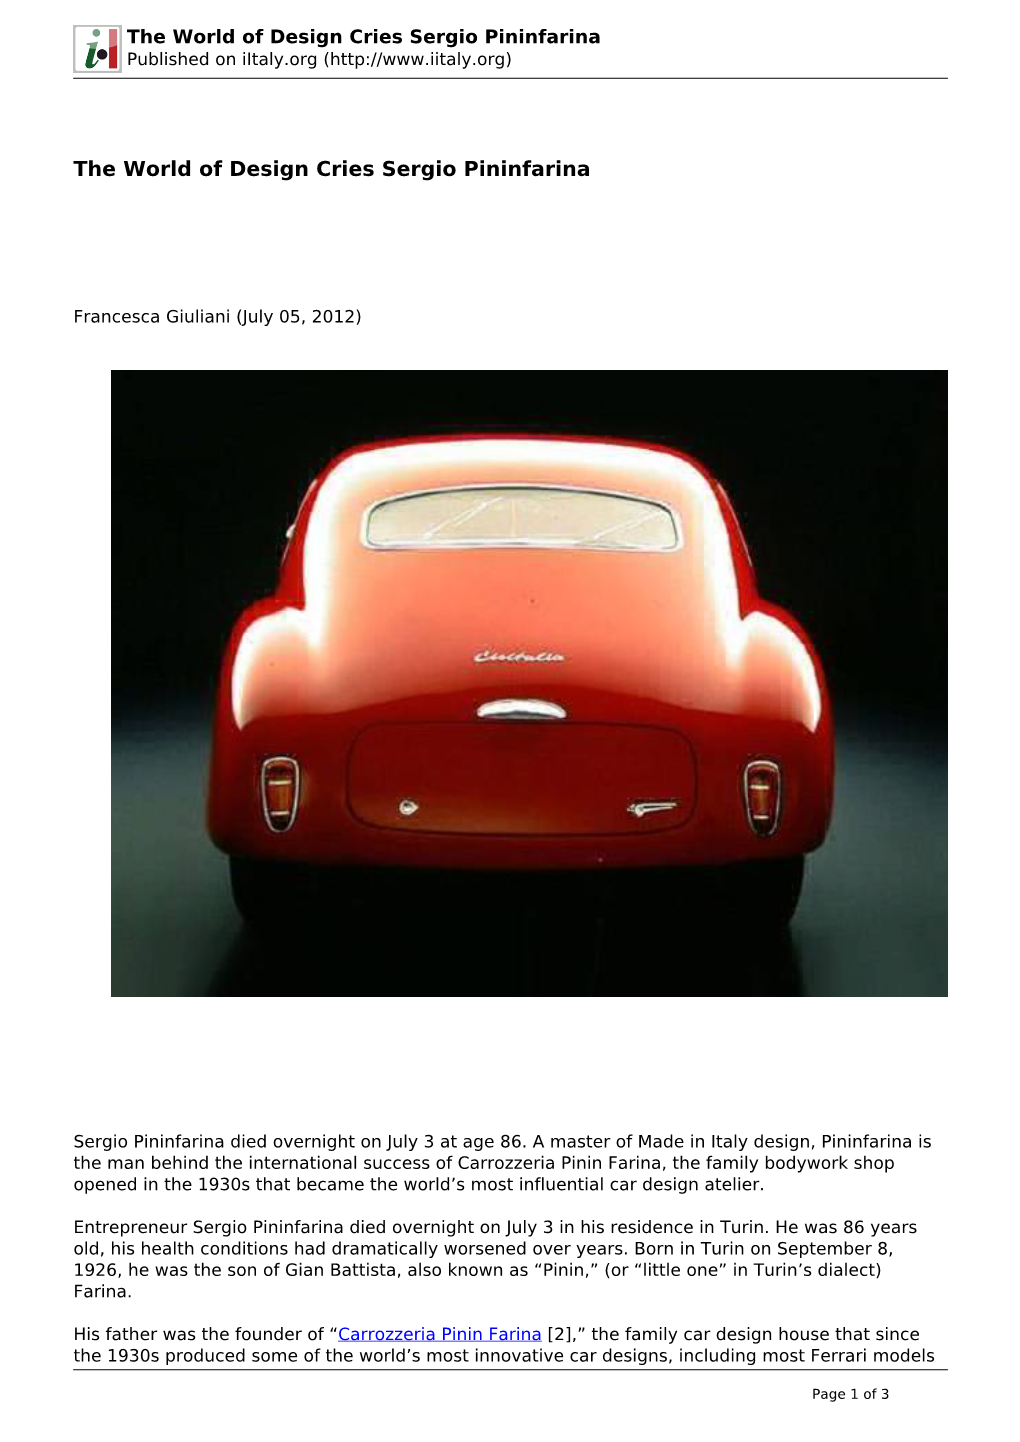 The World of Design Cries Sergio Pininfarina Published on Iitaly.Org (